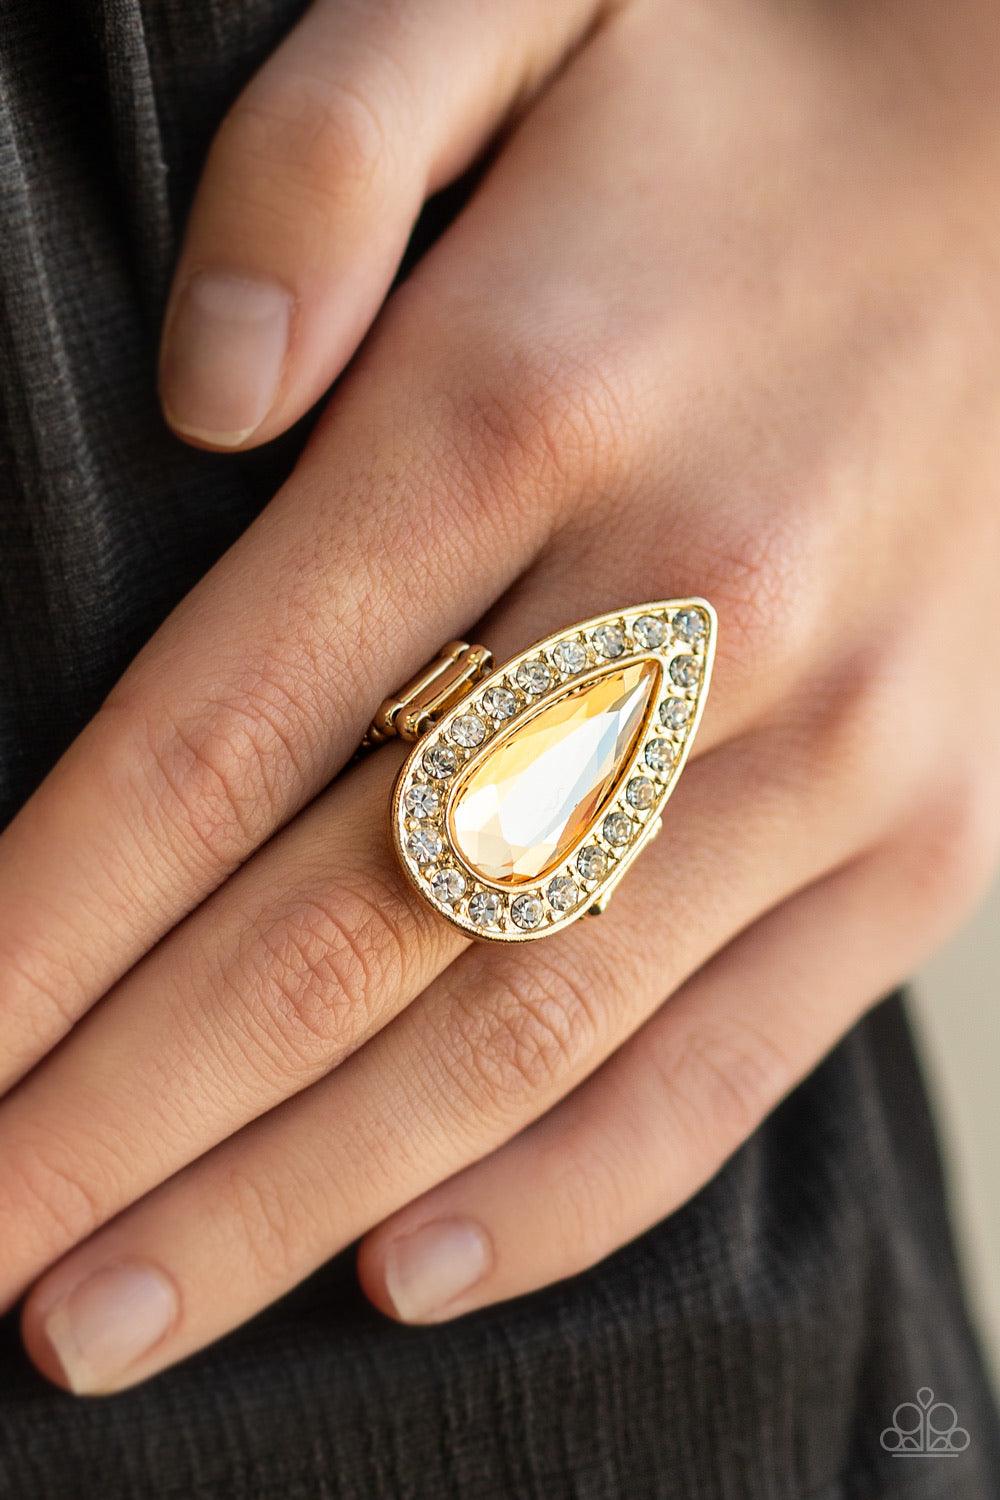 Paparazzi Accessories Majestic Mayhem ~Gold An oversized golden teardrop gem is pressed in the center of a glistening gold teardrop frame radiating with glassy white rhinestones for a fierce look. Features a stretchy band for a flexible fit.